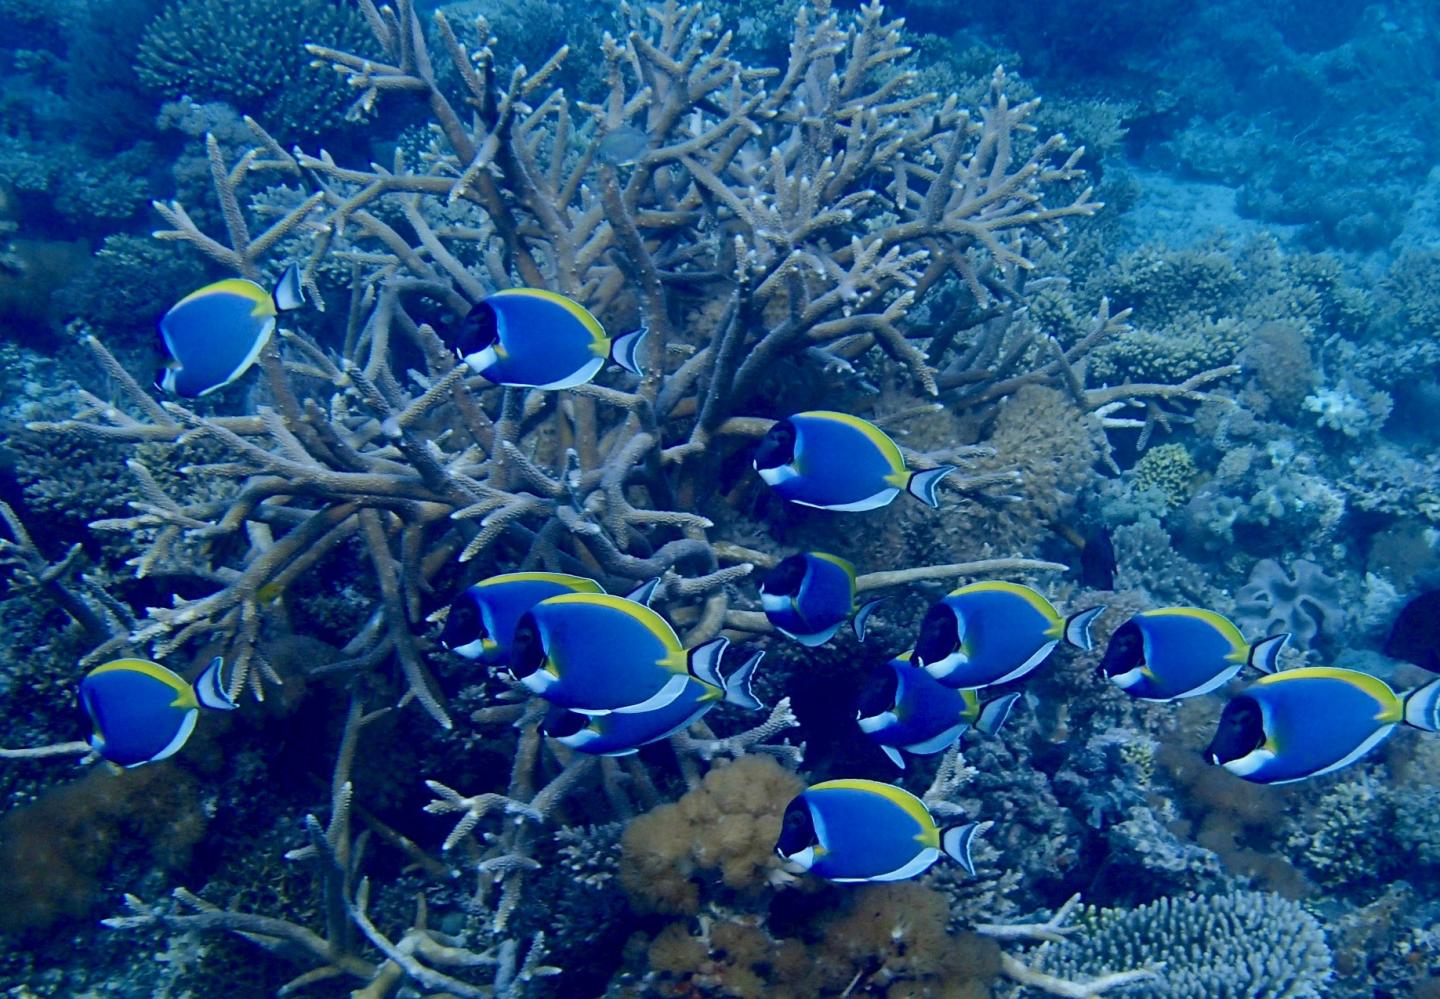 Coral Reefs and Climate Change - How do we fish on coral reefs